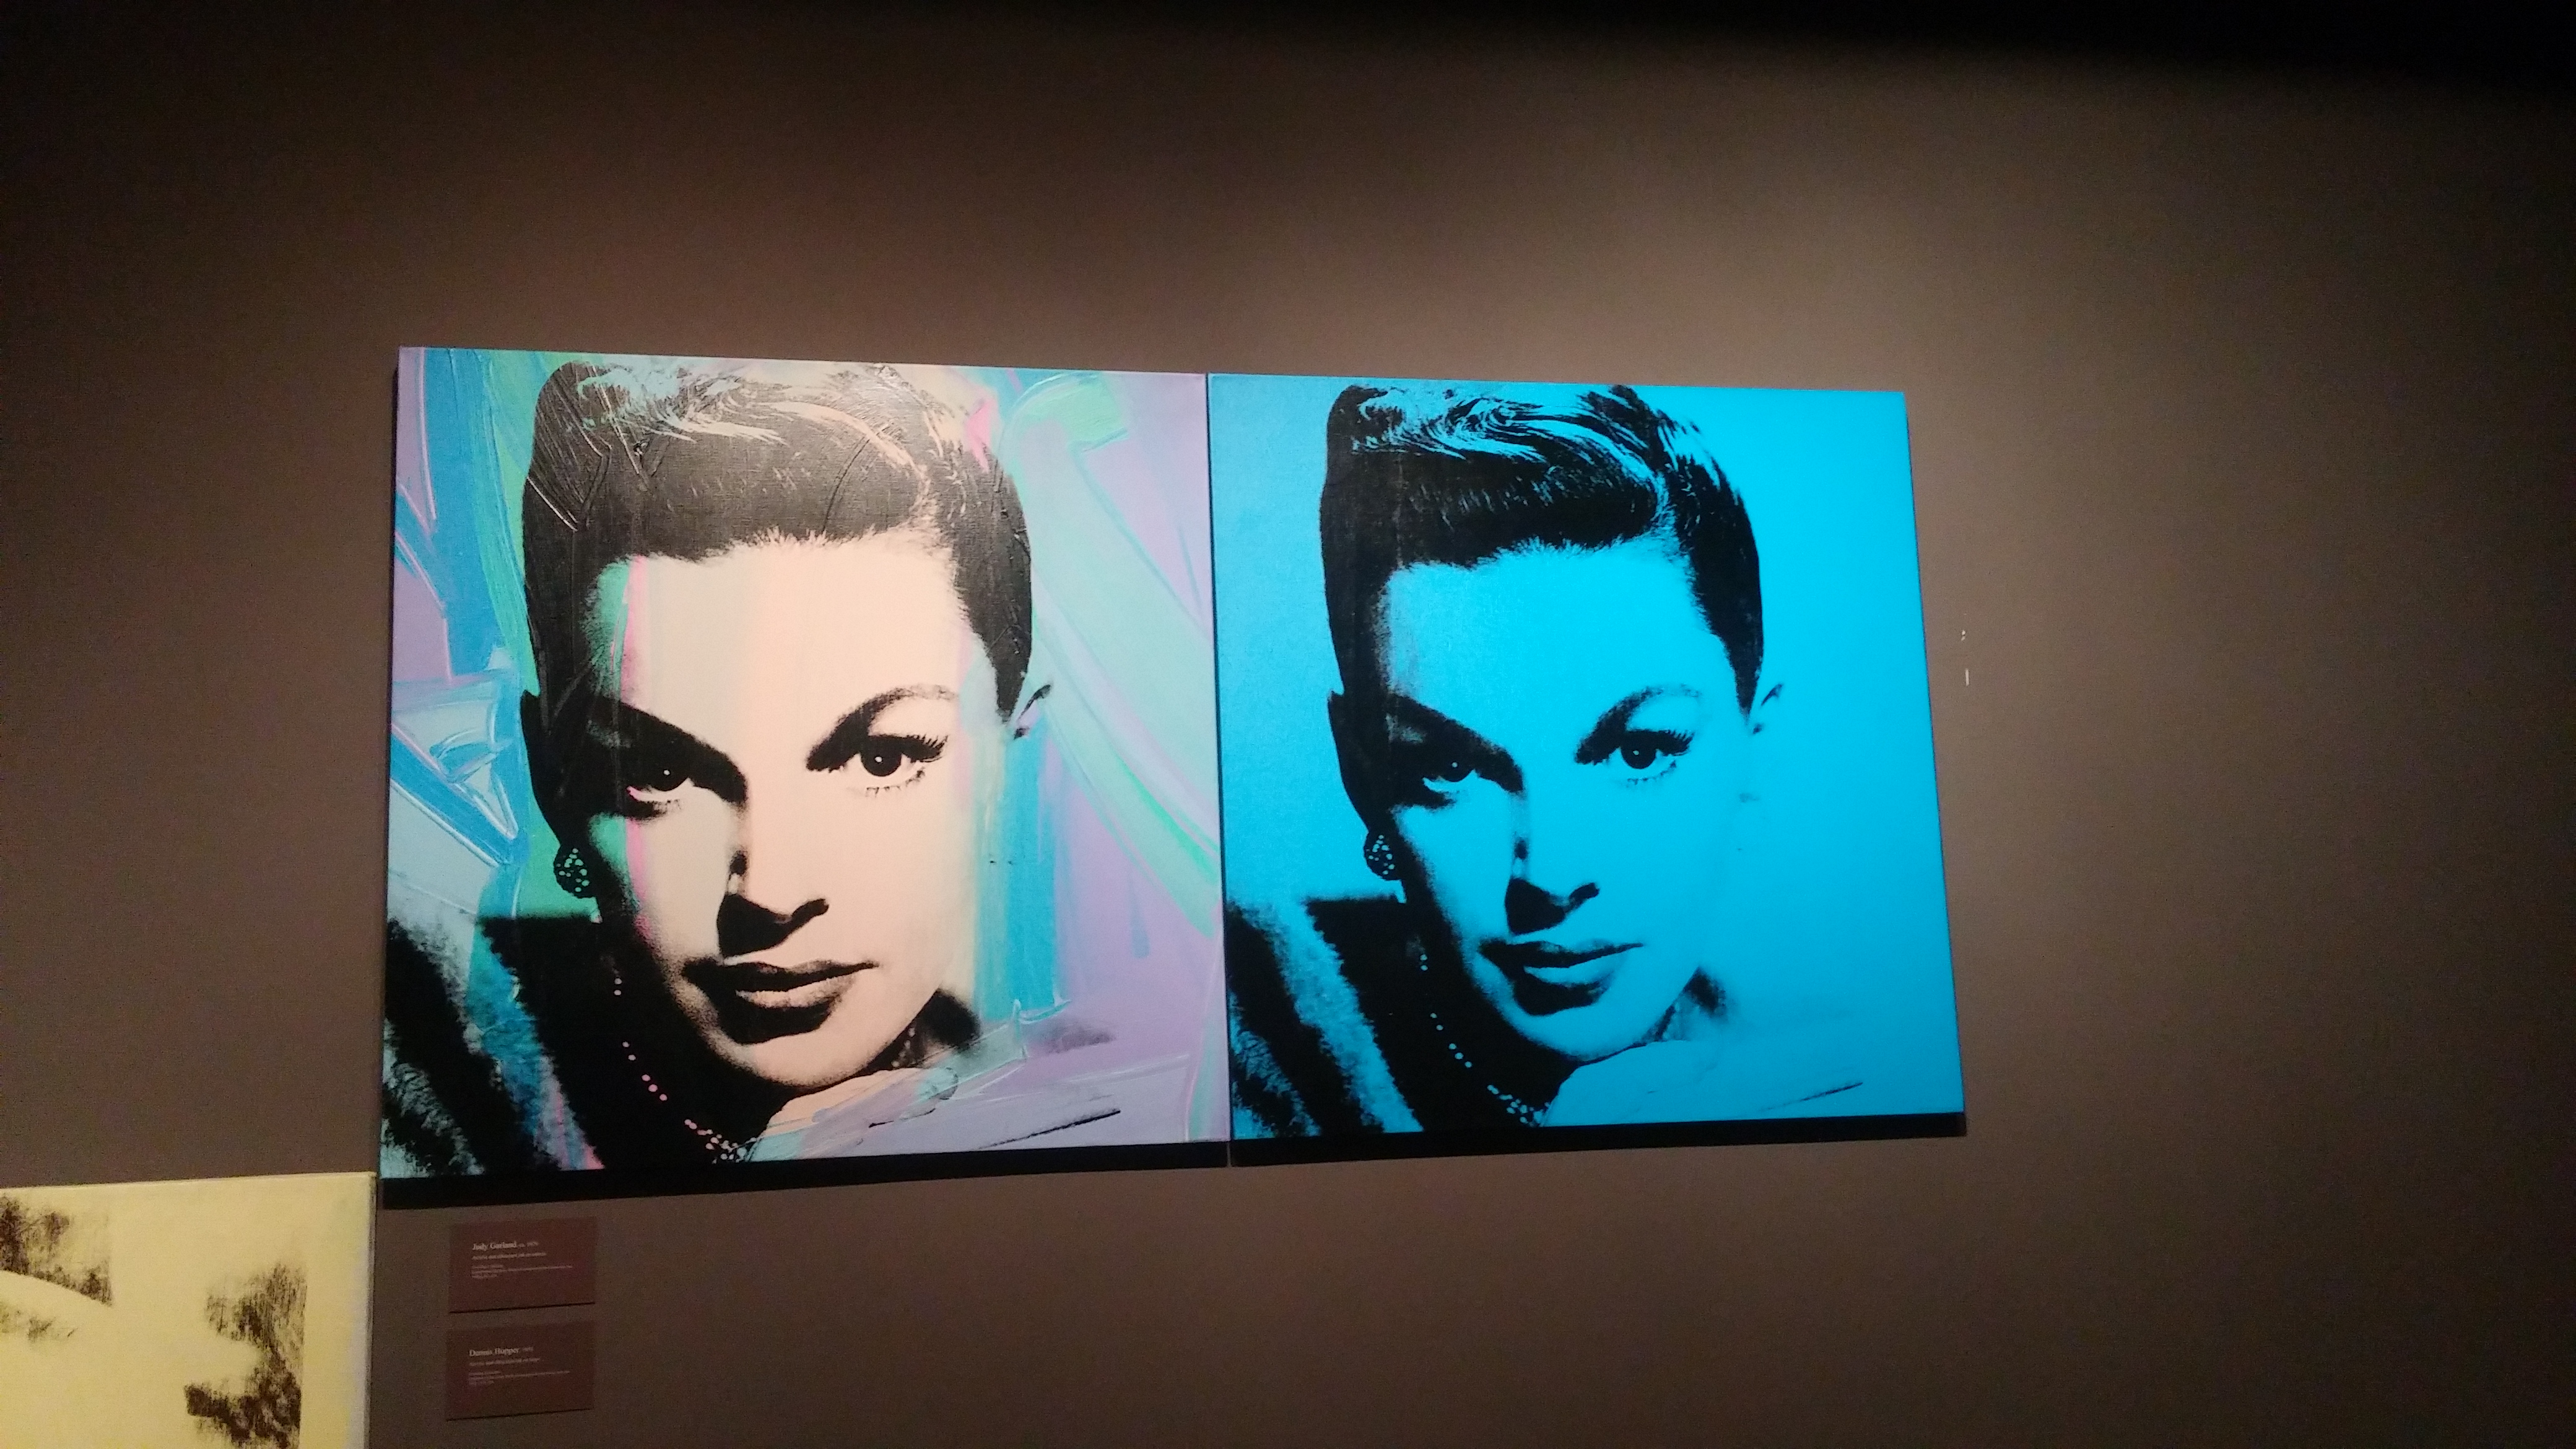 Photo 2 from Warhol